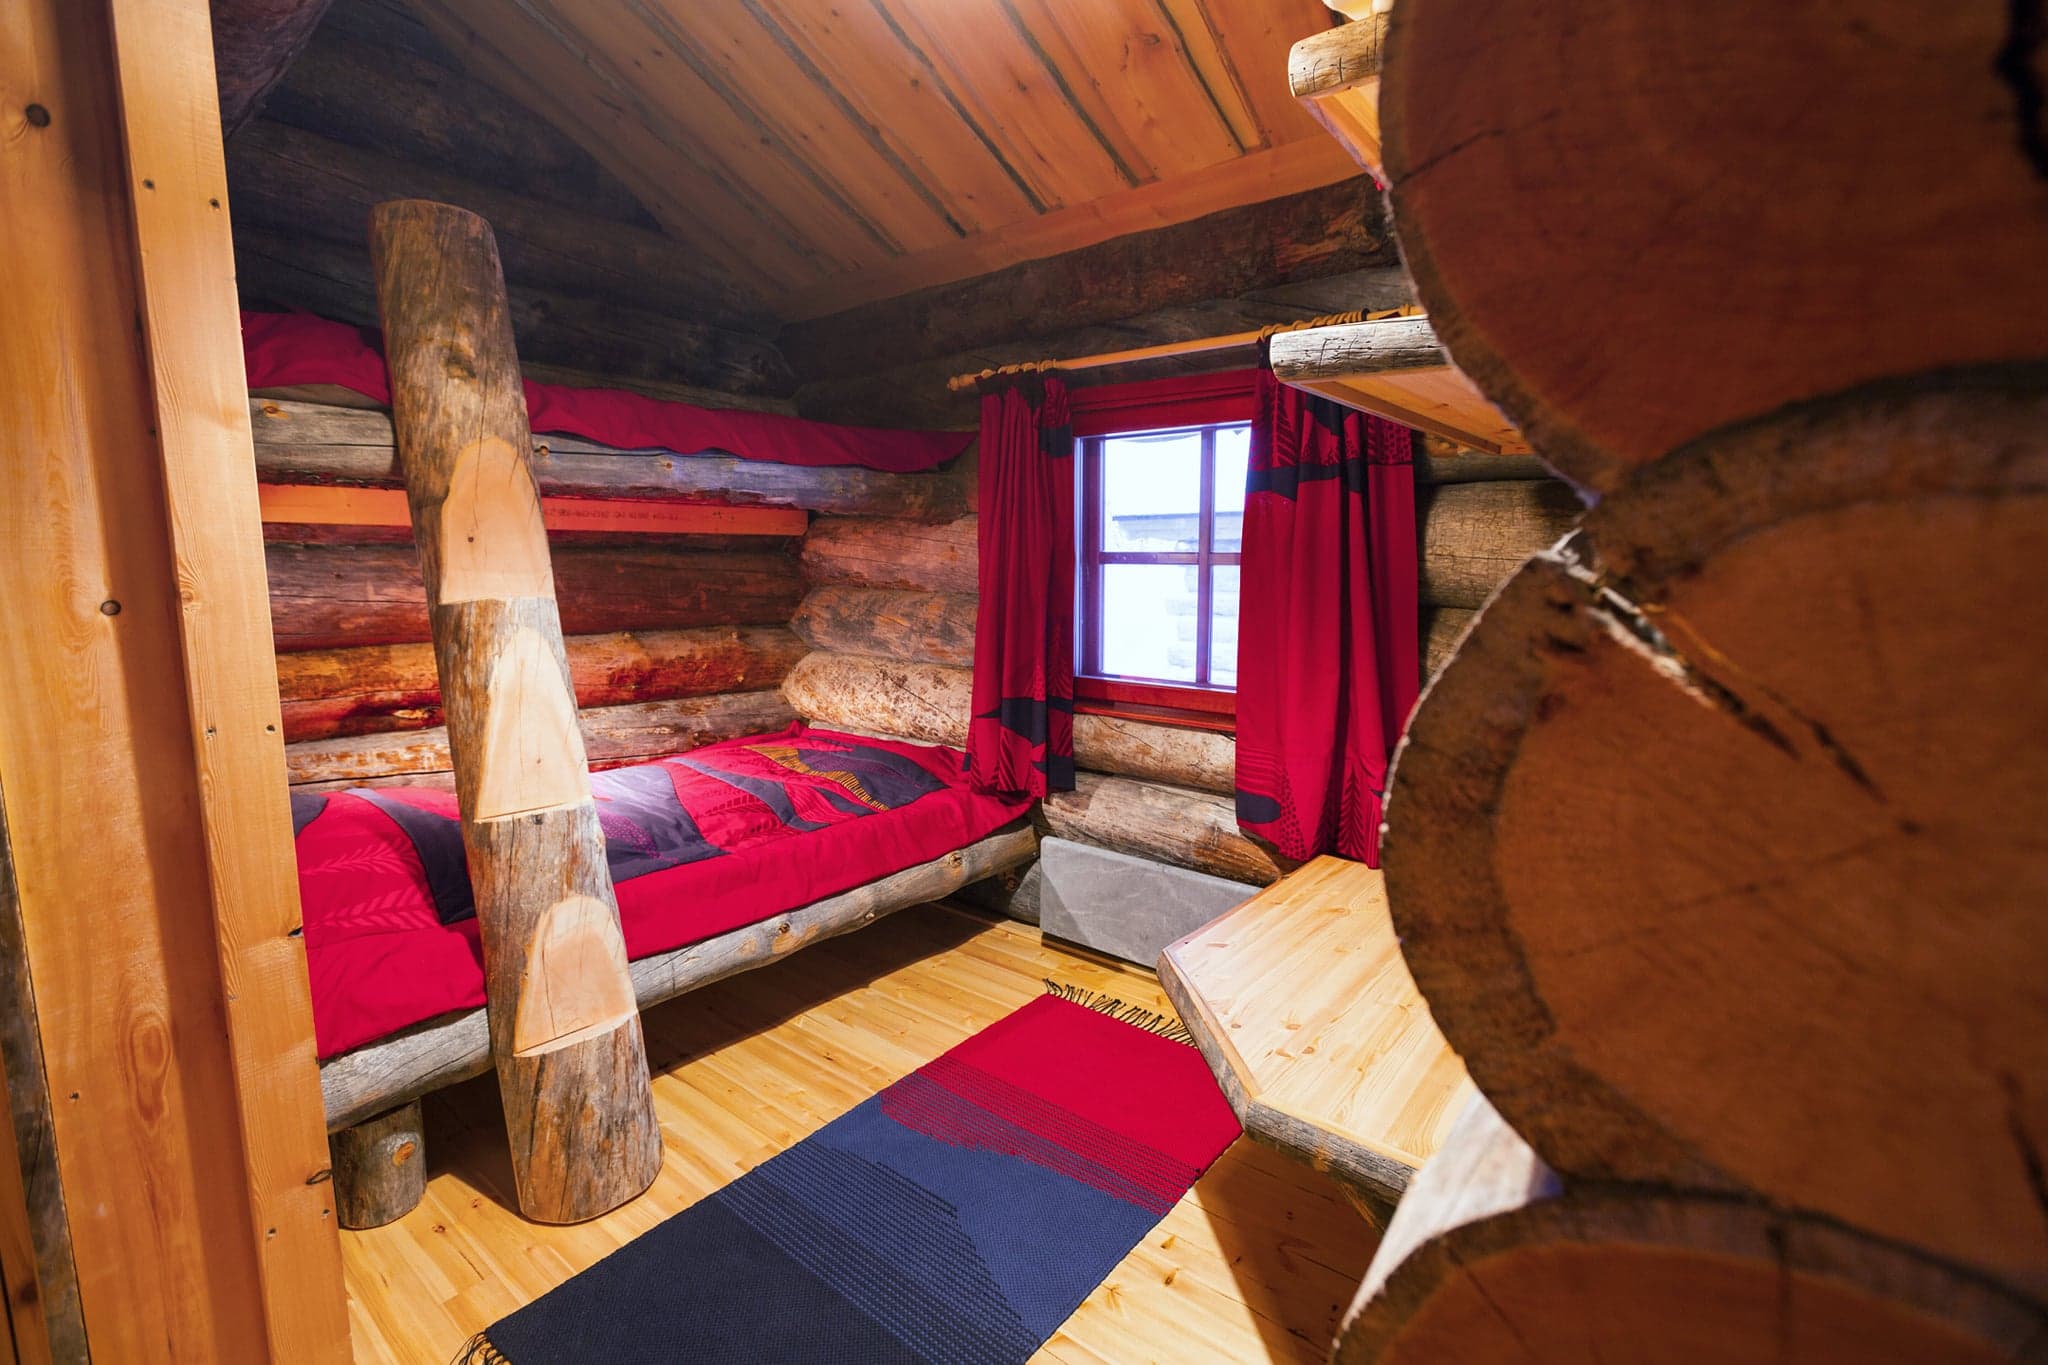 Wander Blog - Here are the most insane homes and properties you can book on AirBnB